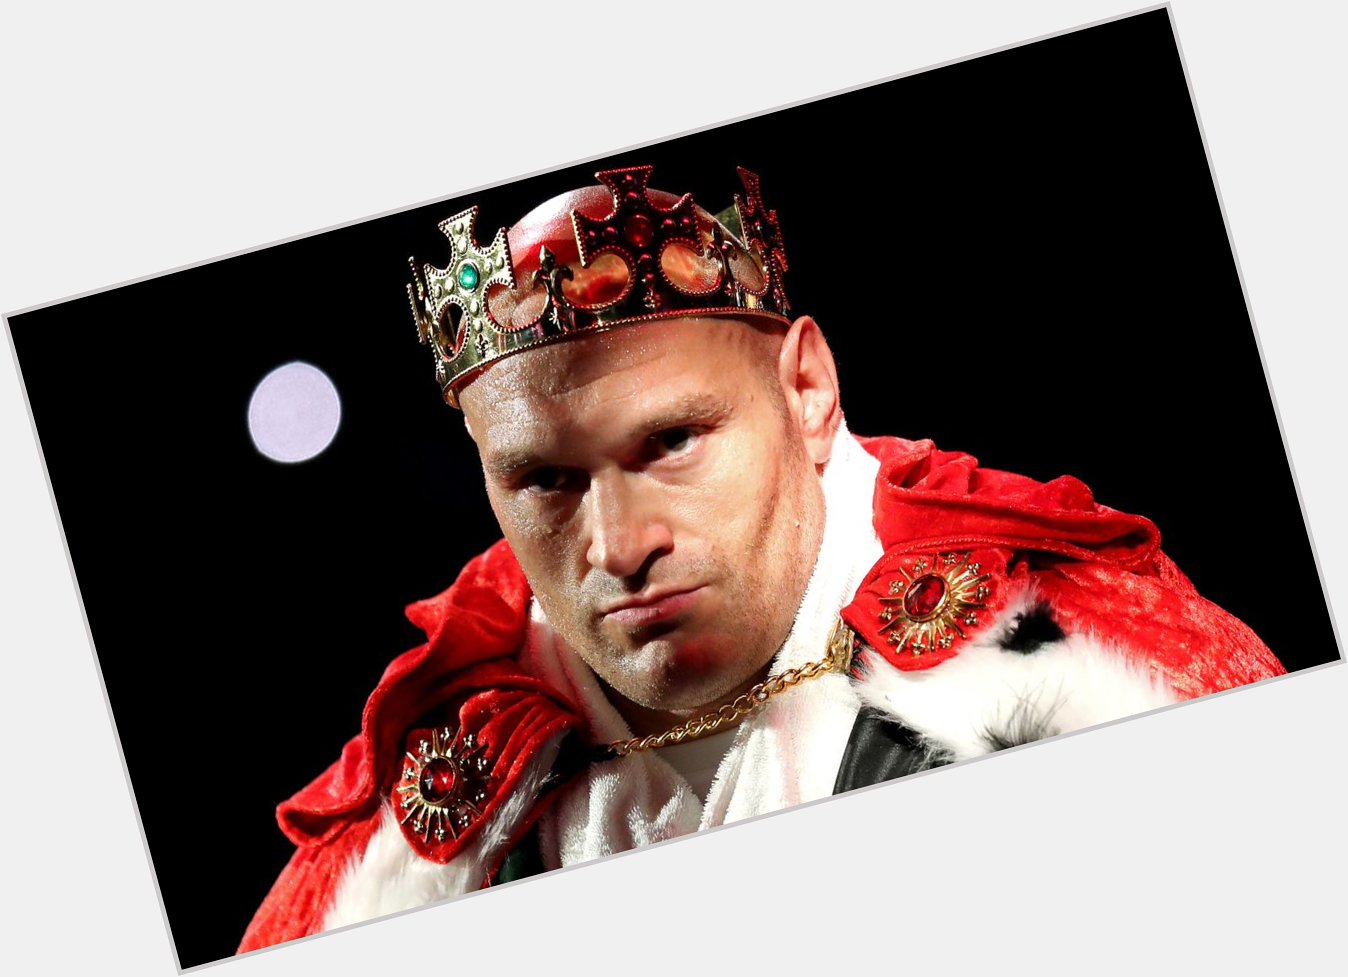 Happy Birthday to the Gypsy King Tyson Fury. Another Year where he hasn\t boxed. 